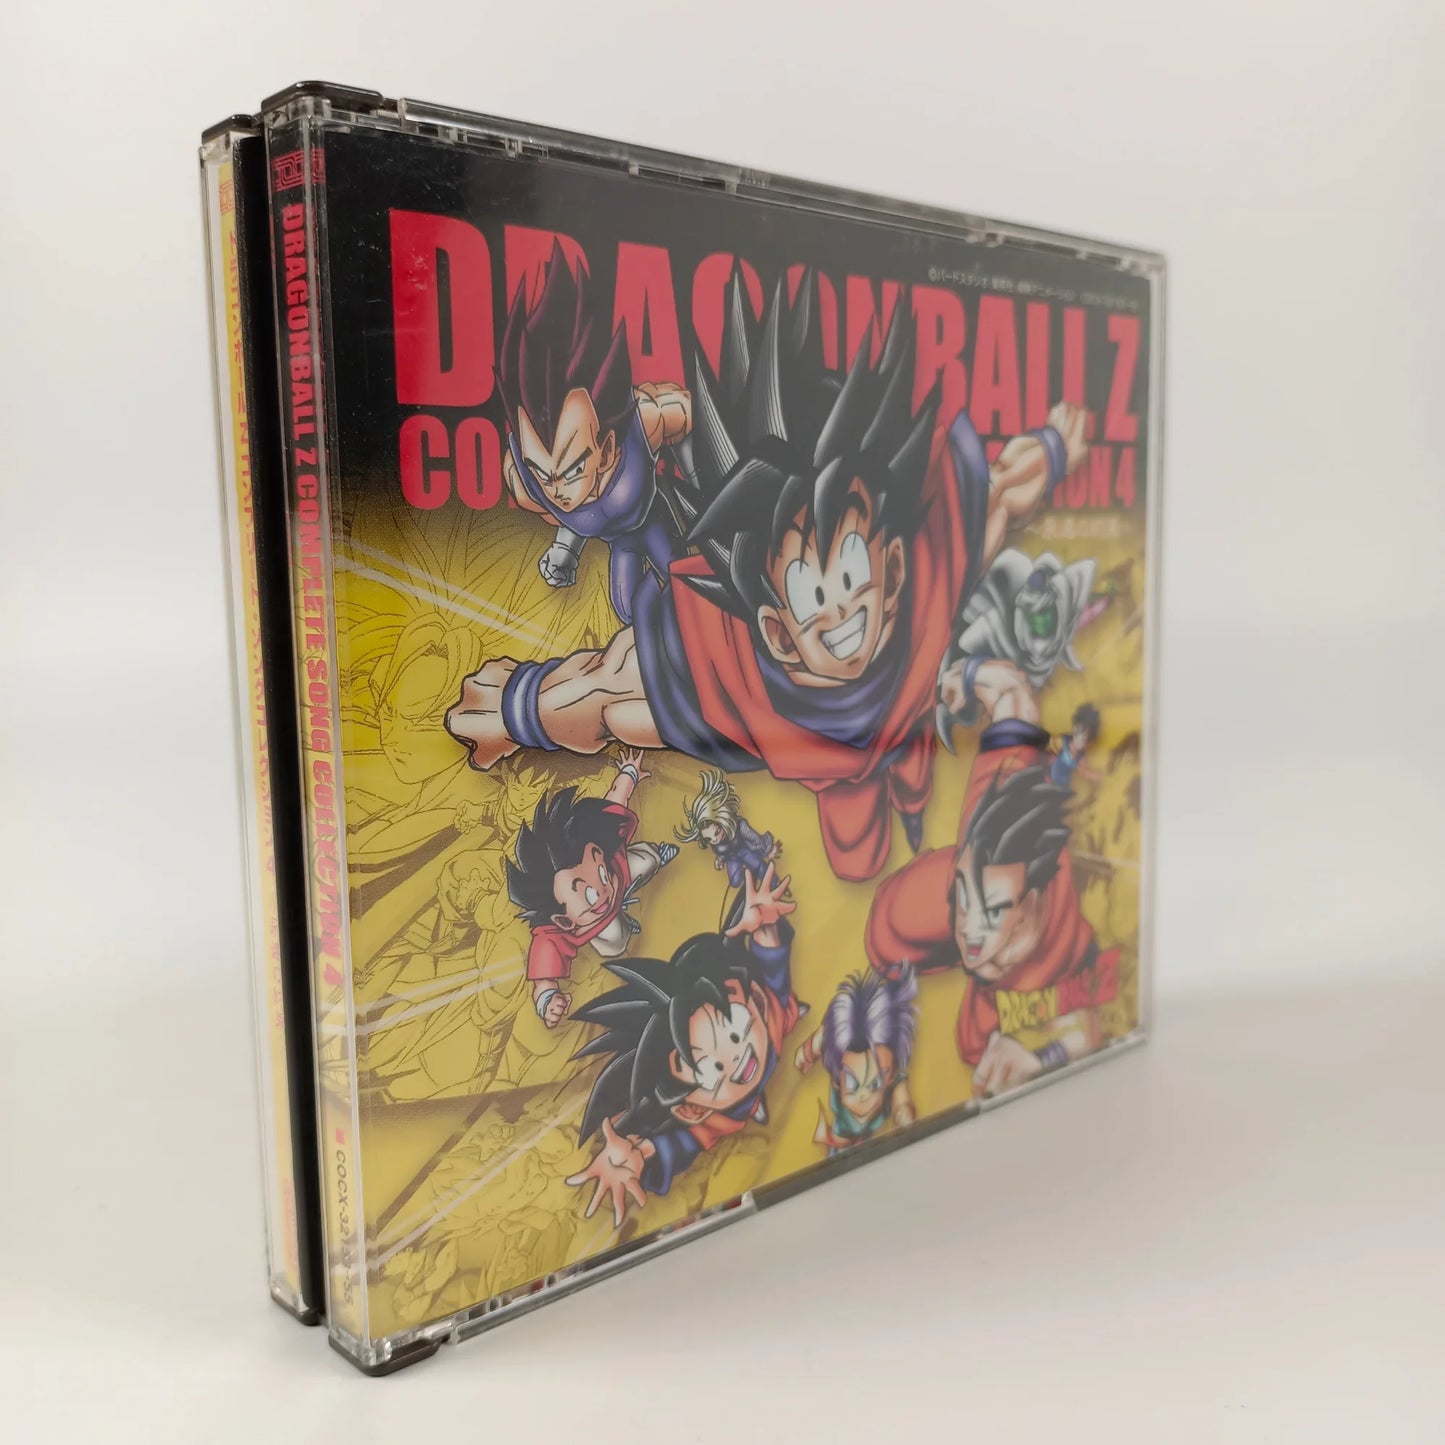 Dragon Ball Z Complete Song Collection Volume 4